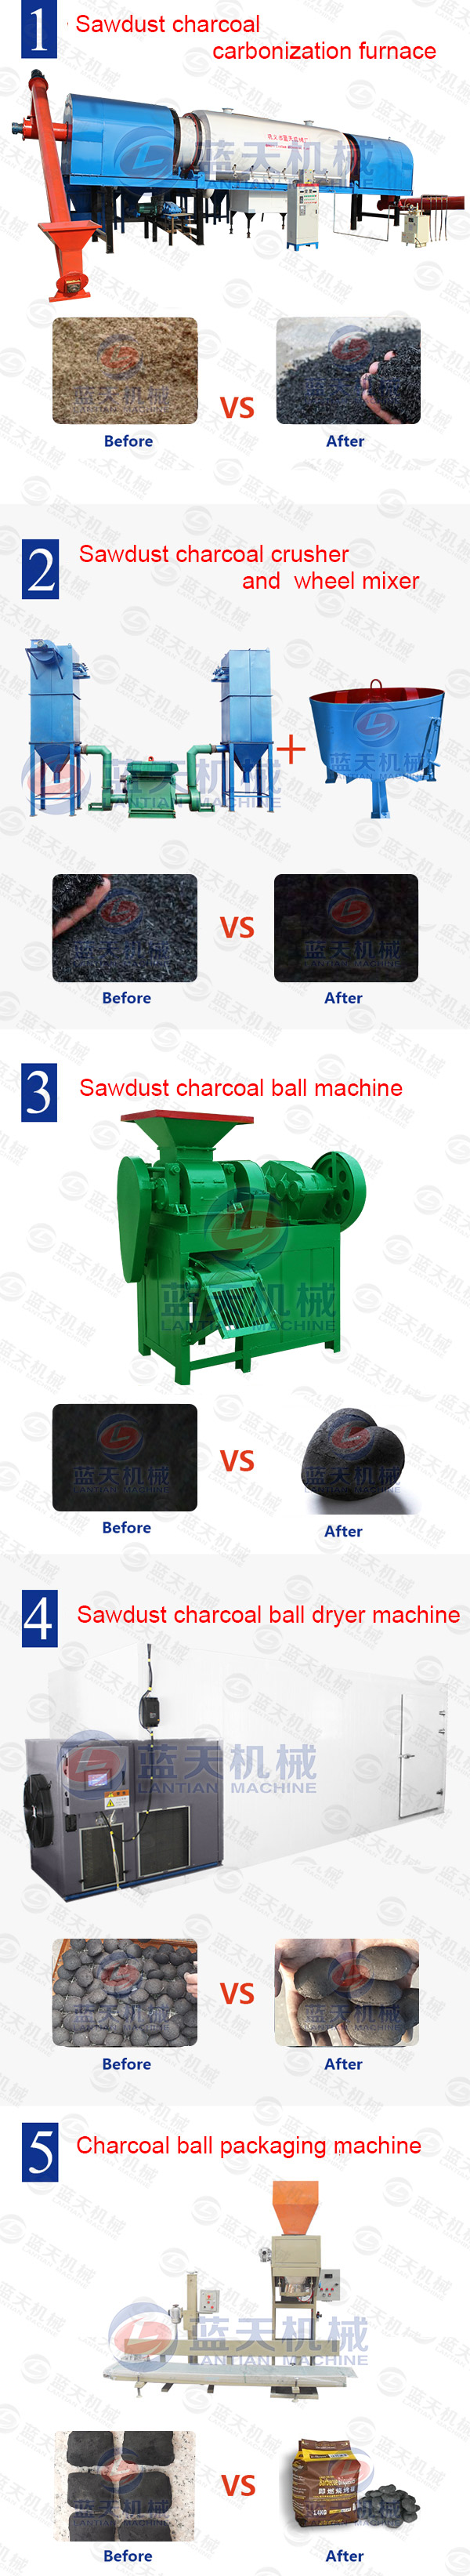 Product Line of Sawdust Charcoal Ball Briquette Machine